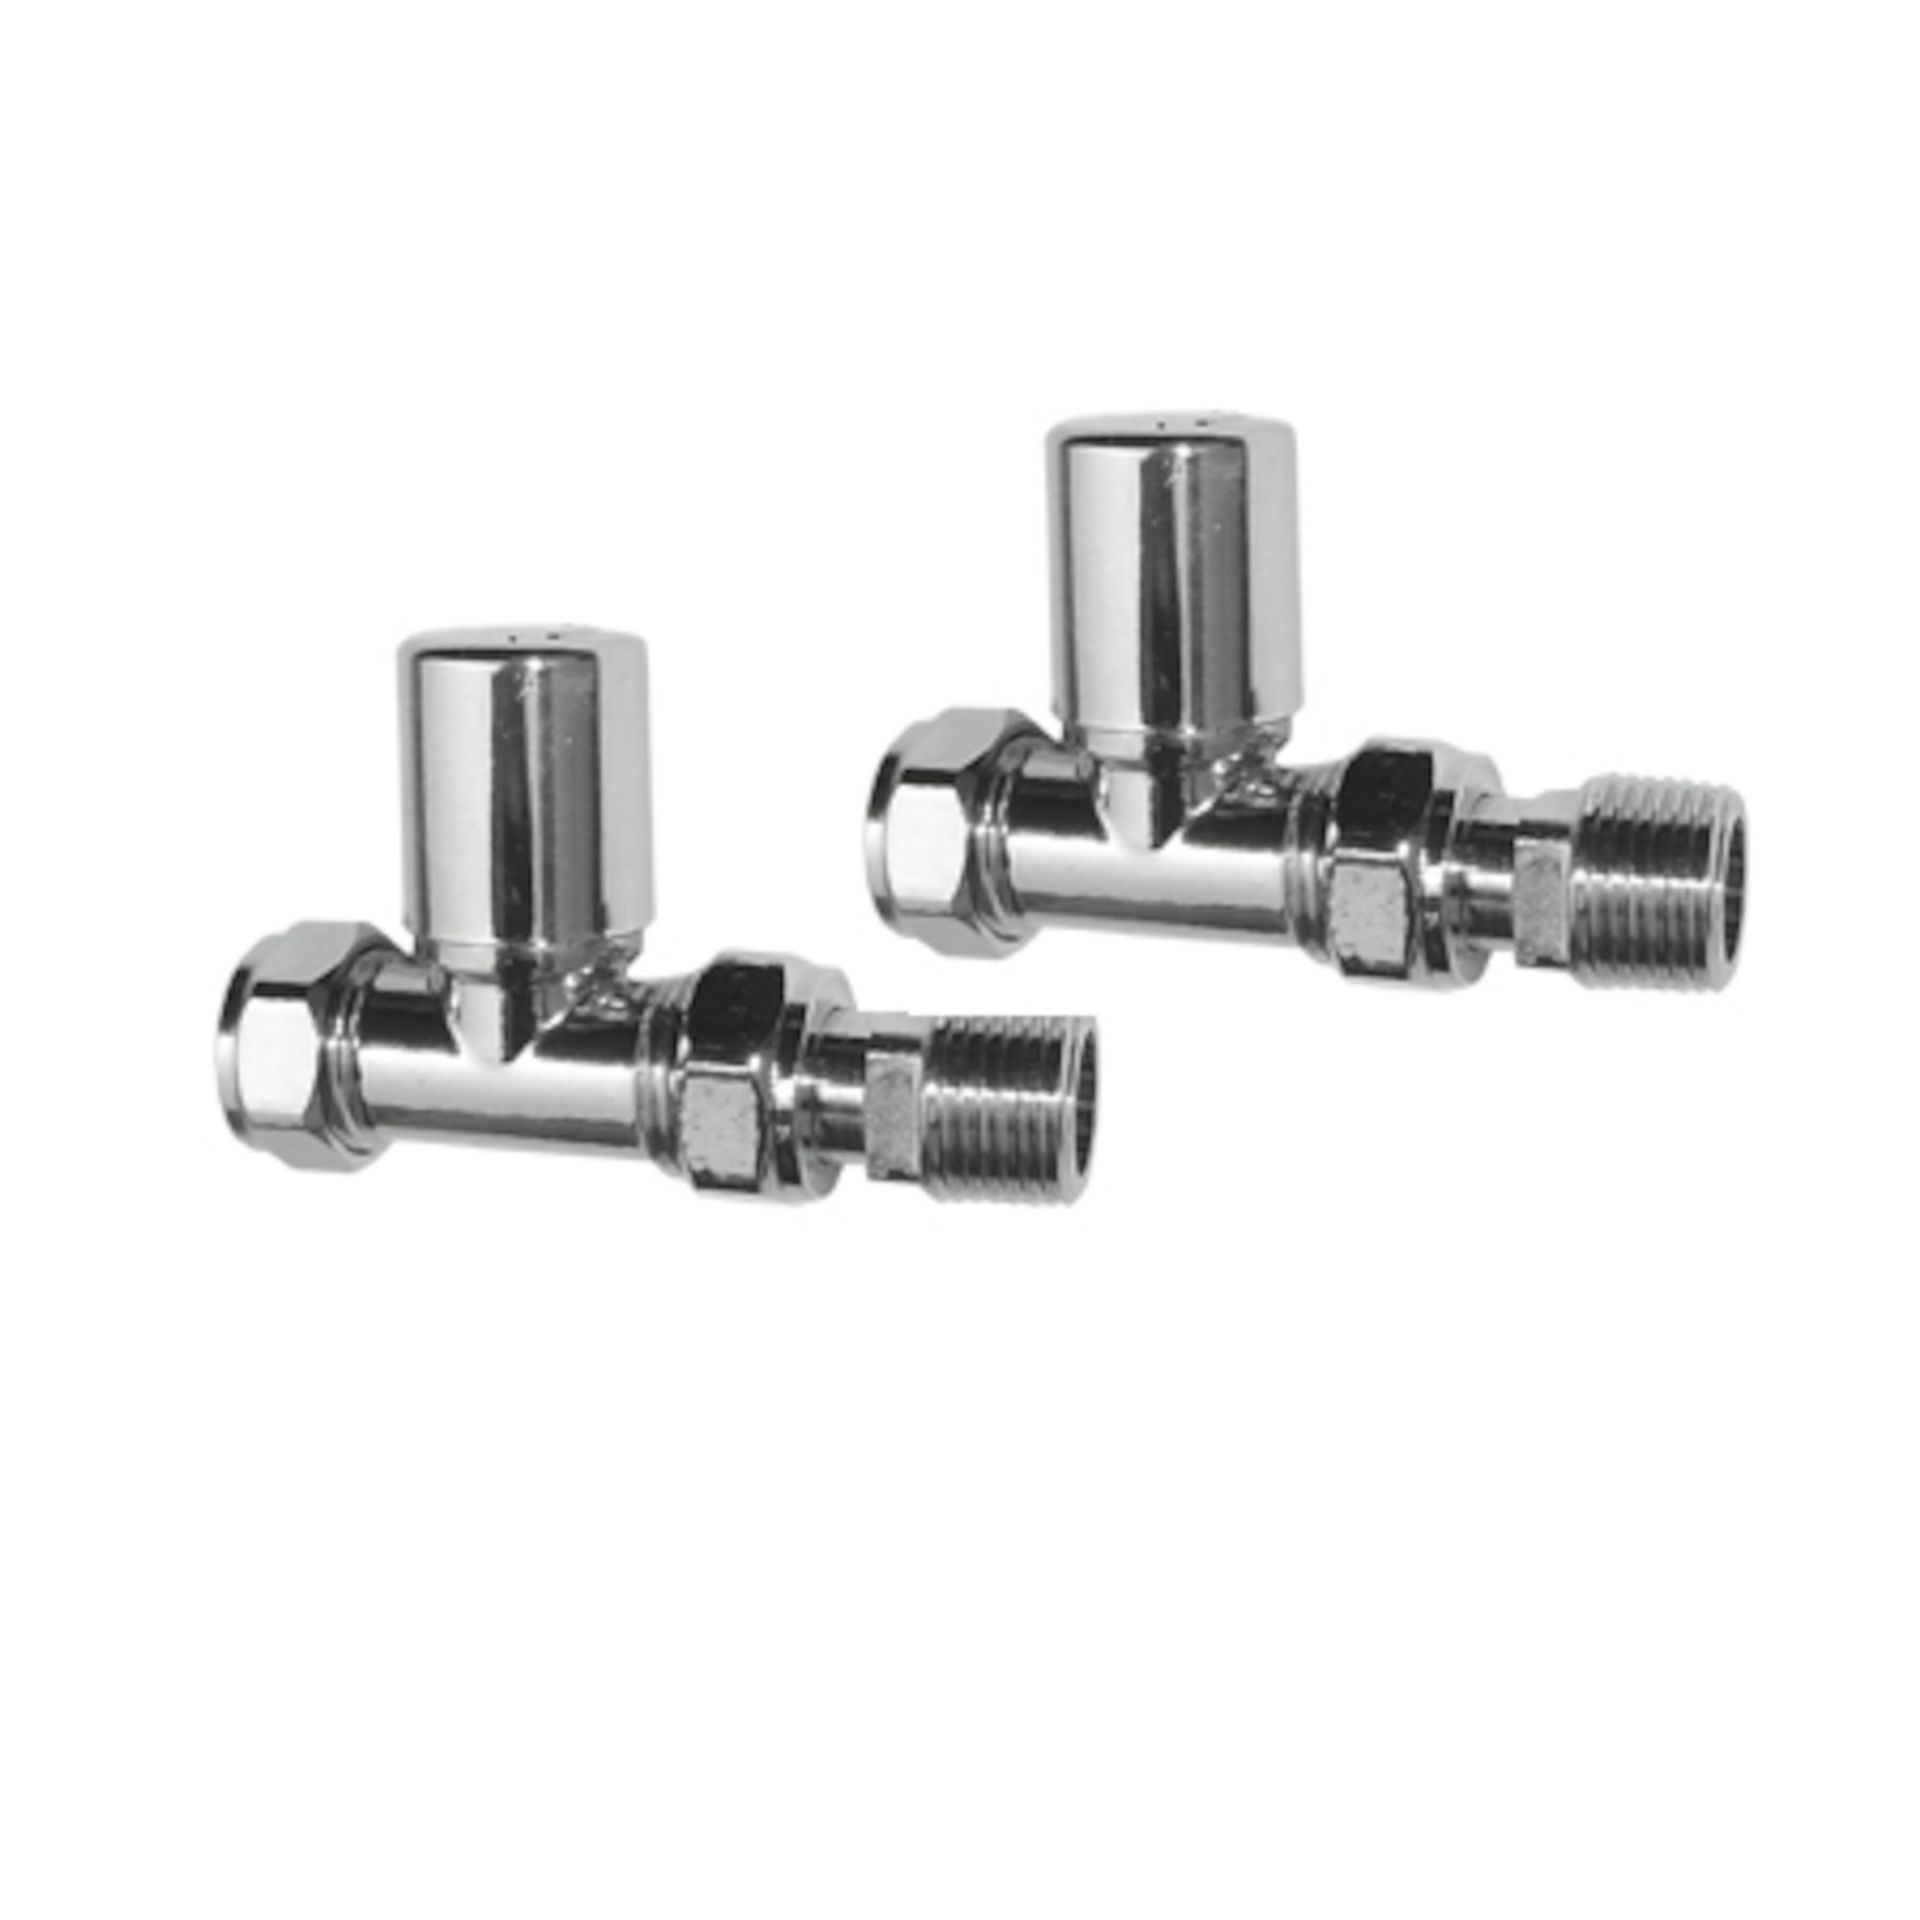 (QT1005) Standard 15mm Connection Straight Chrome Radiator Valves Chrome Plated Solid Brass S... - Image 3 of 6